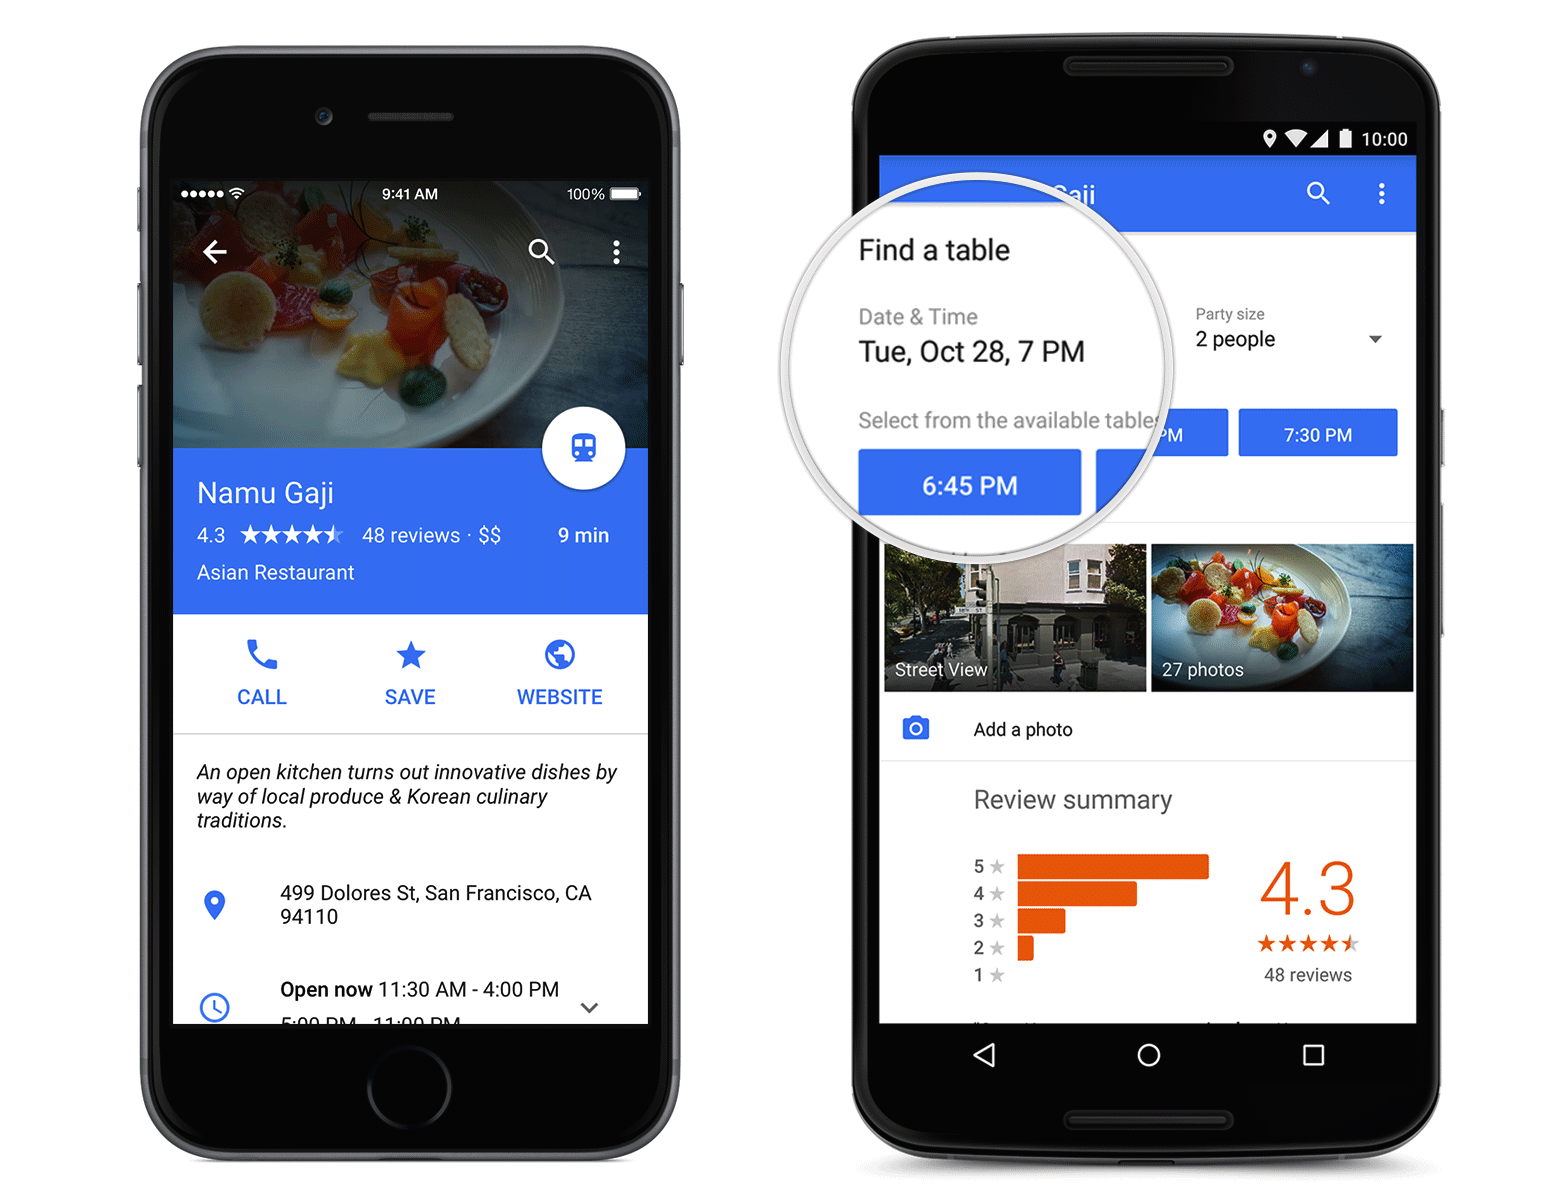 Google Maps Gets Suave Thanks To Material Design